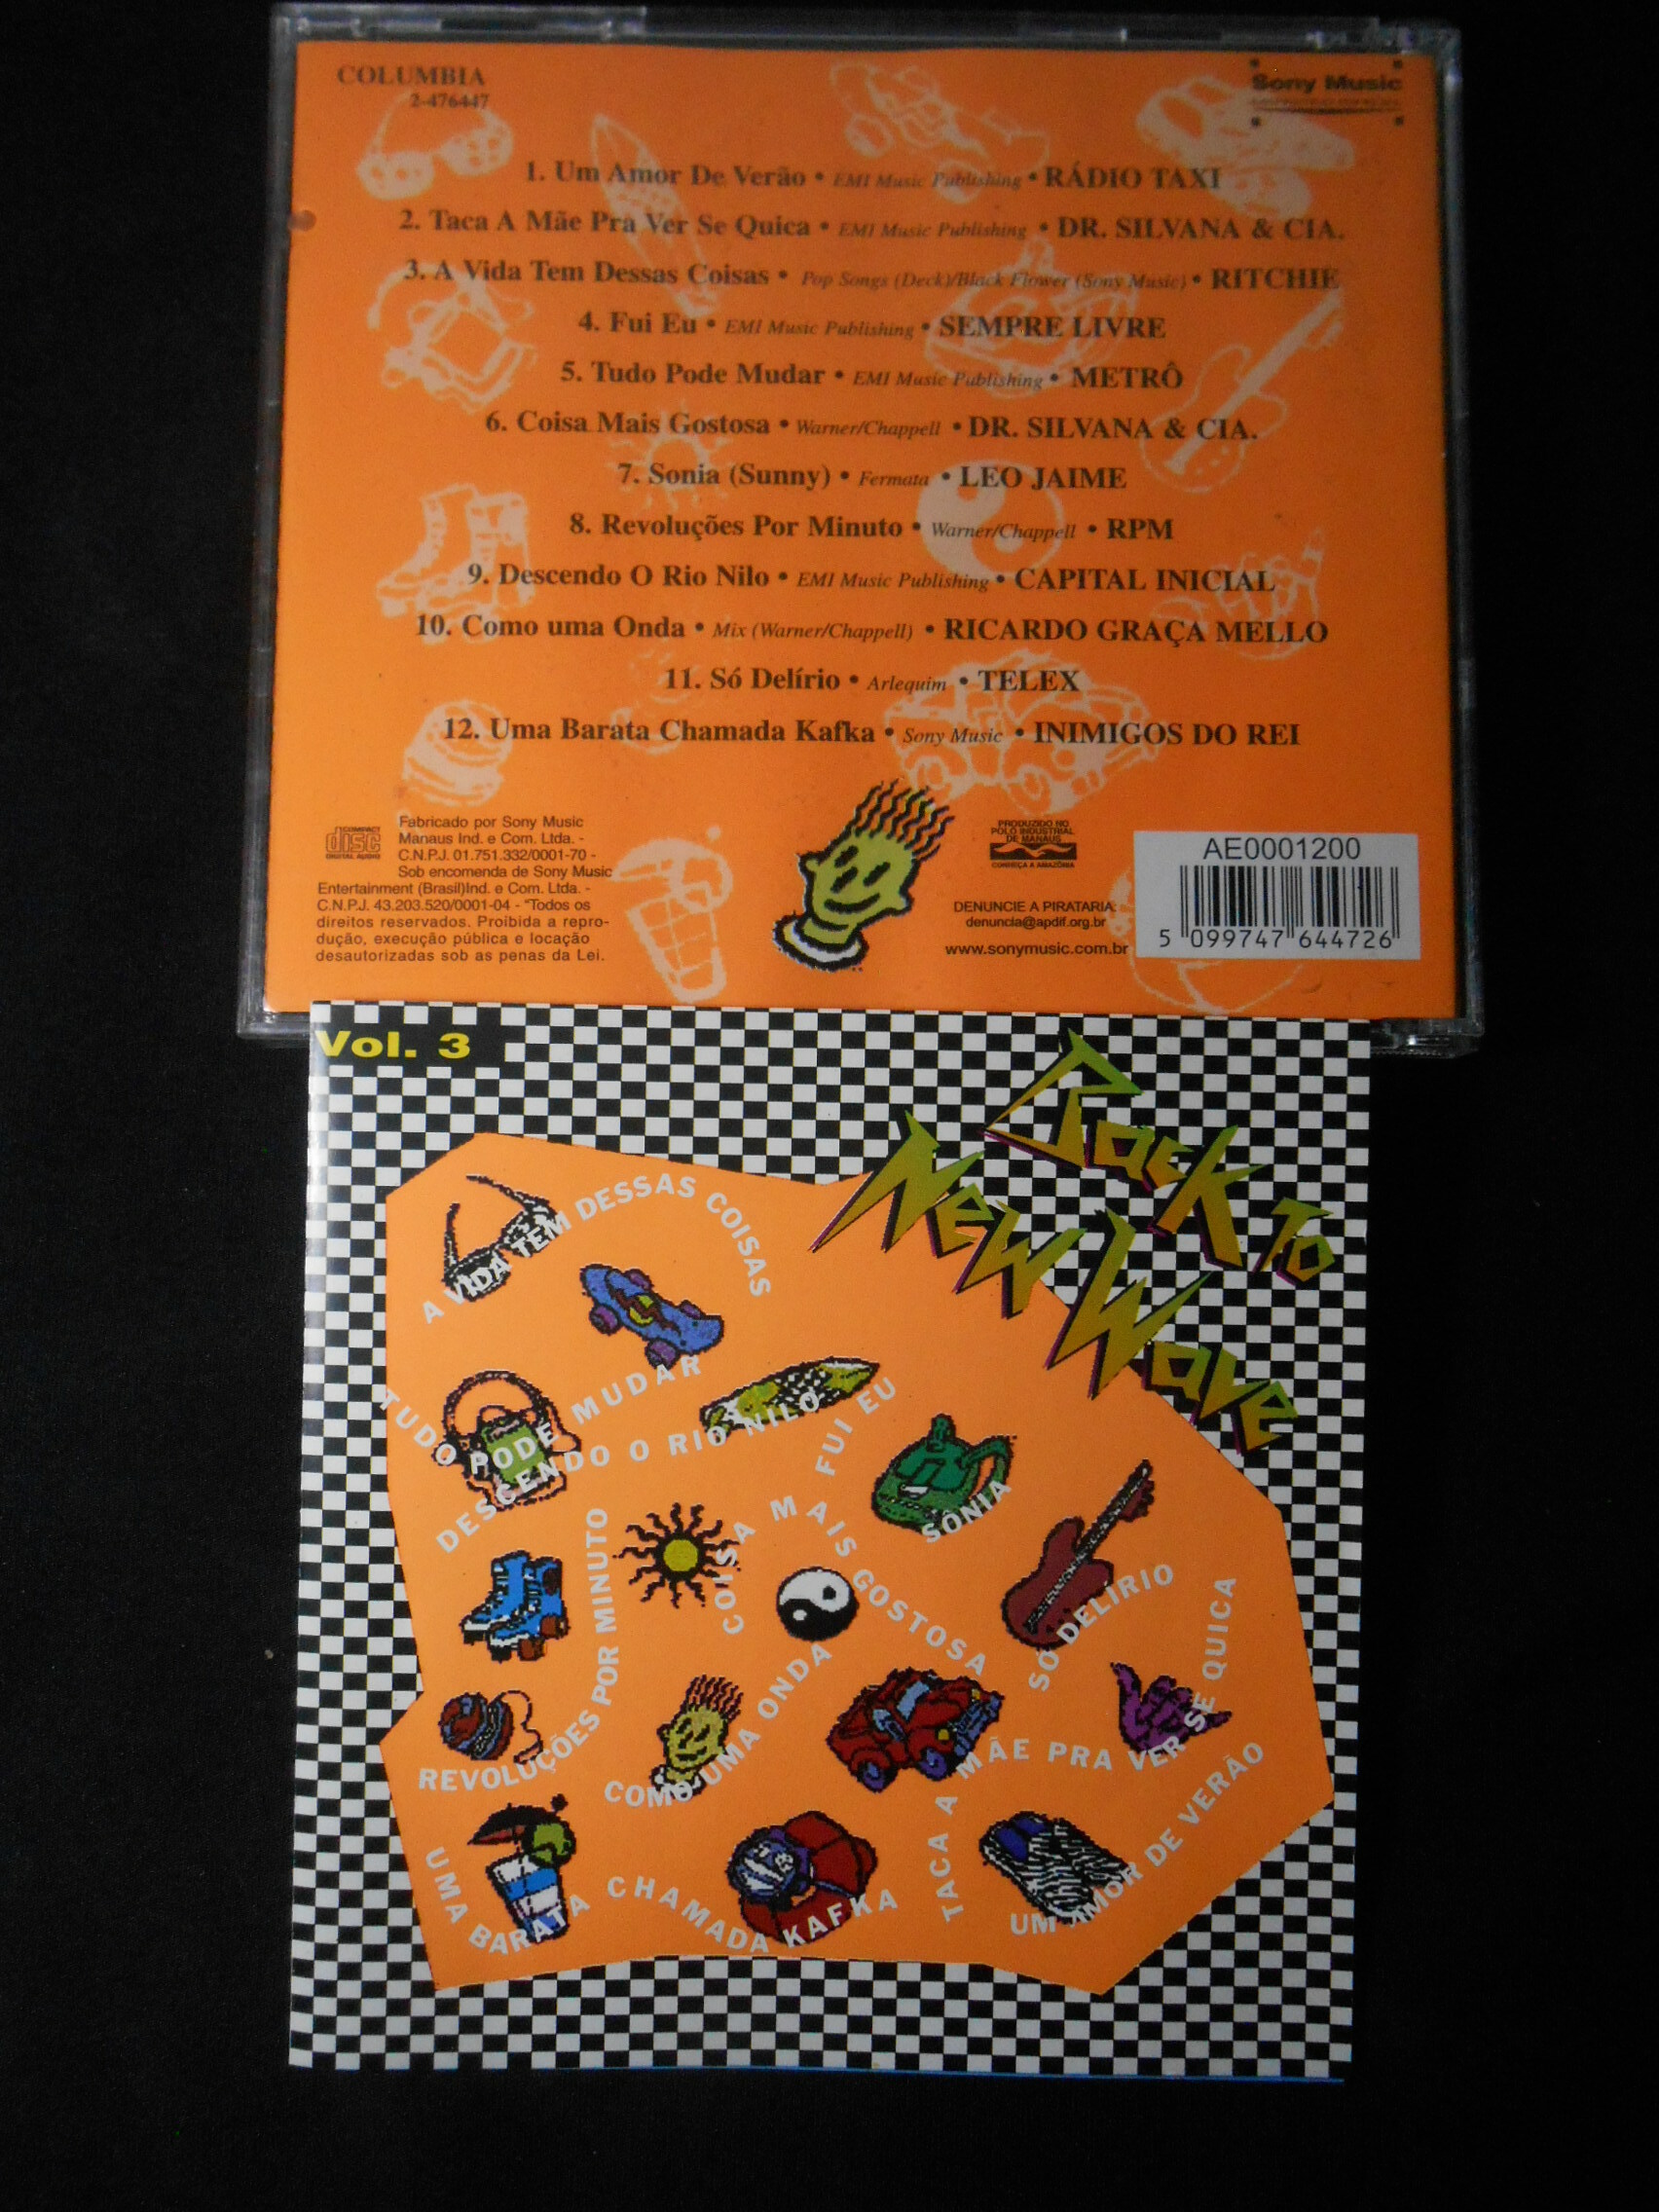 CD - Back To New Wave - Vol 3